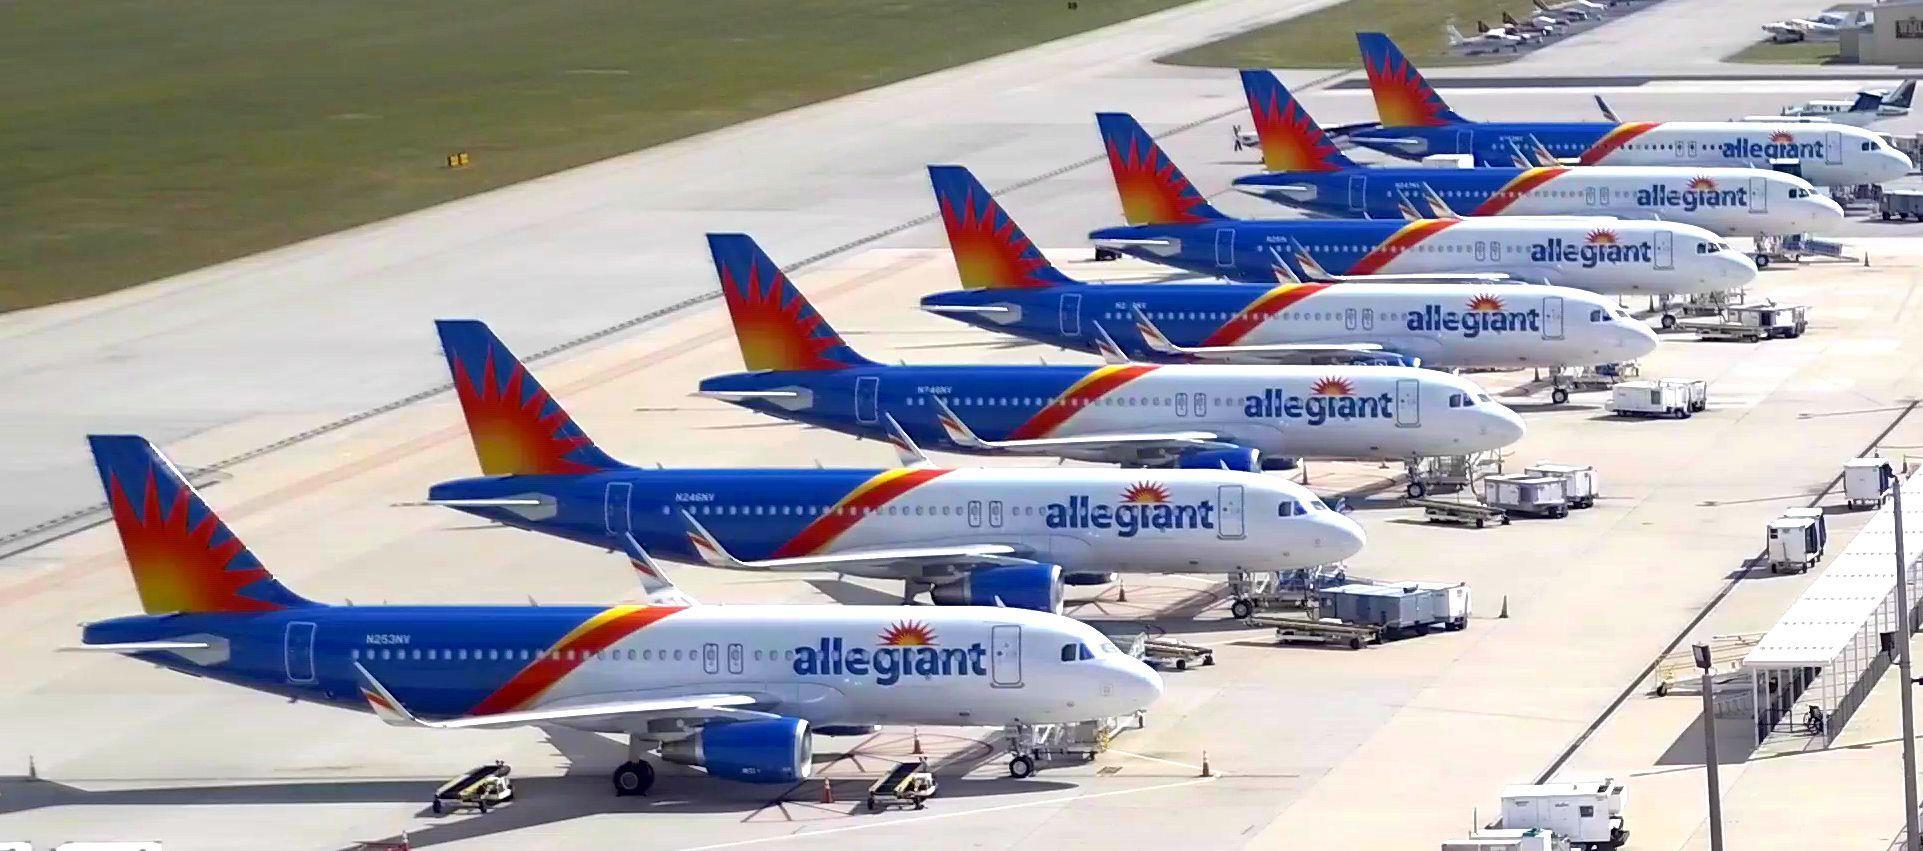 Low-cost airline company Allegiant Air placed order for 100 airplanes Boeing 737MAX